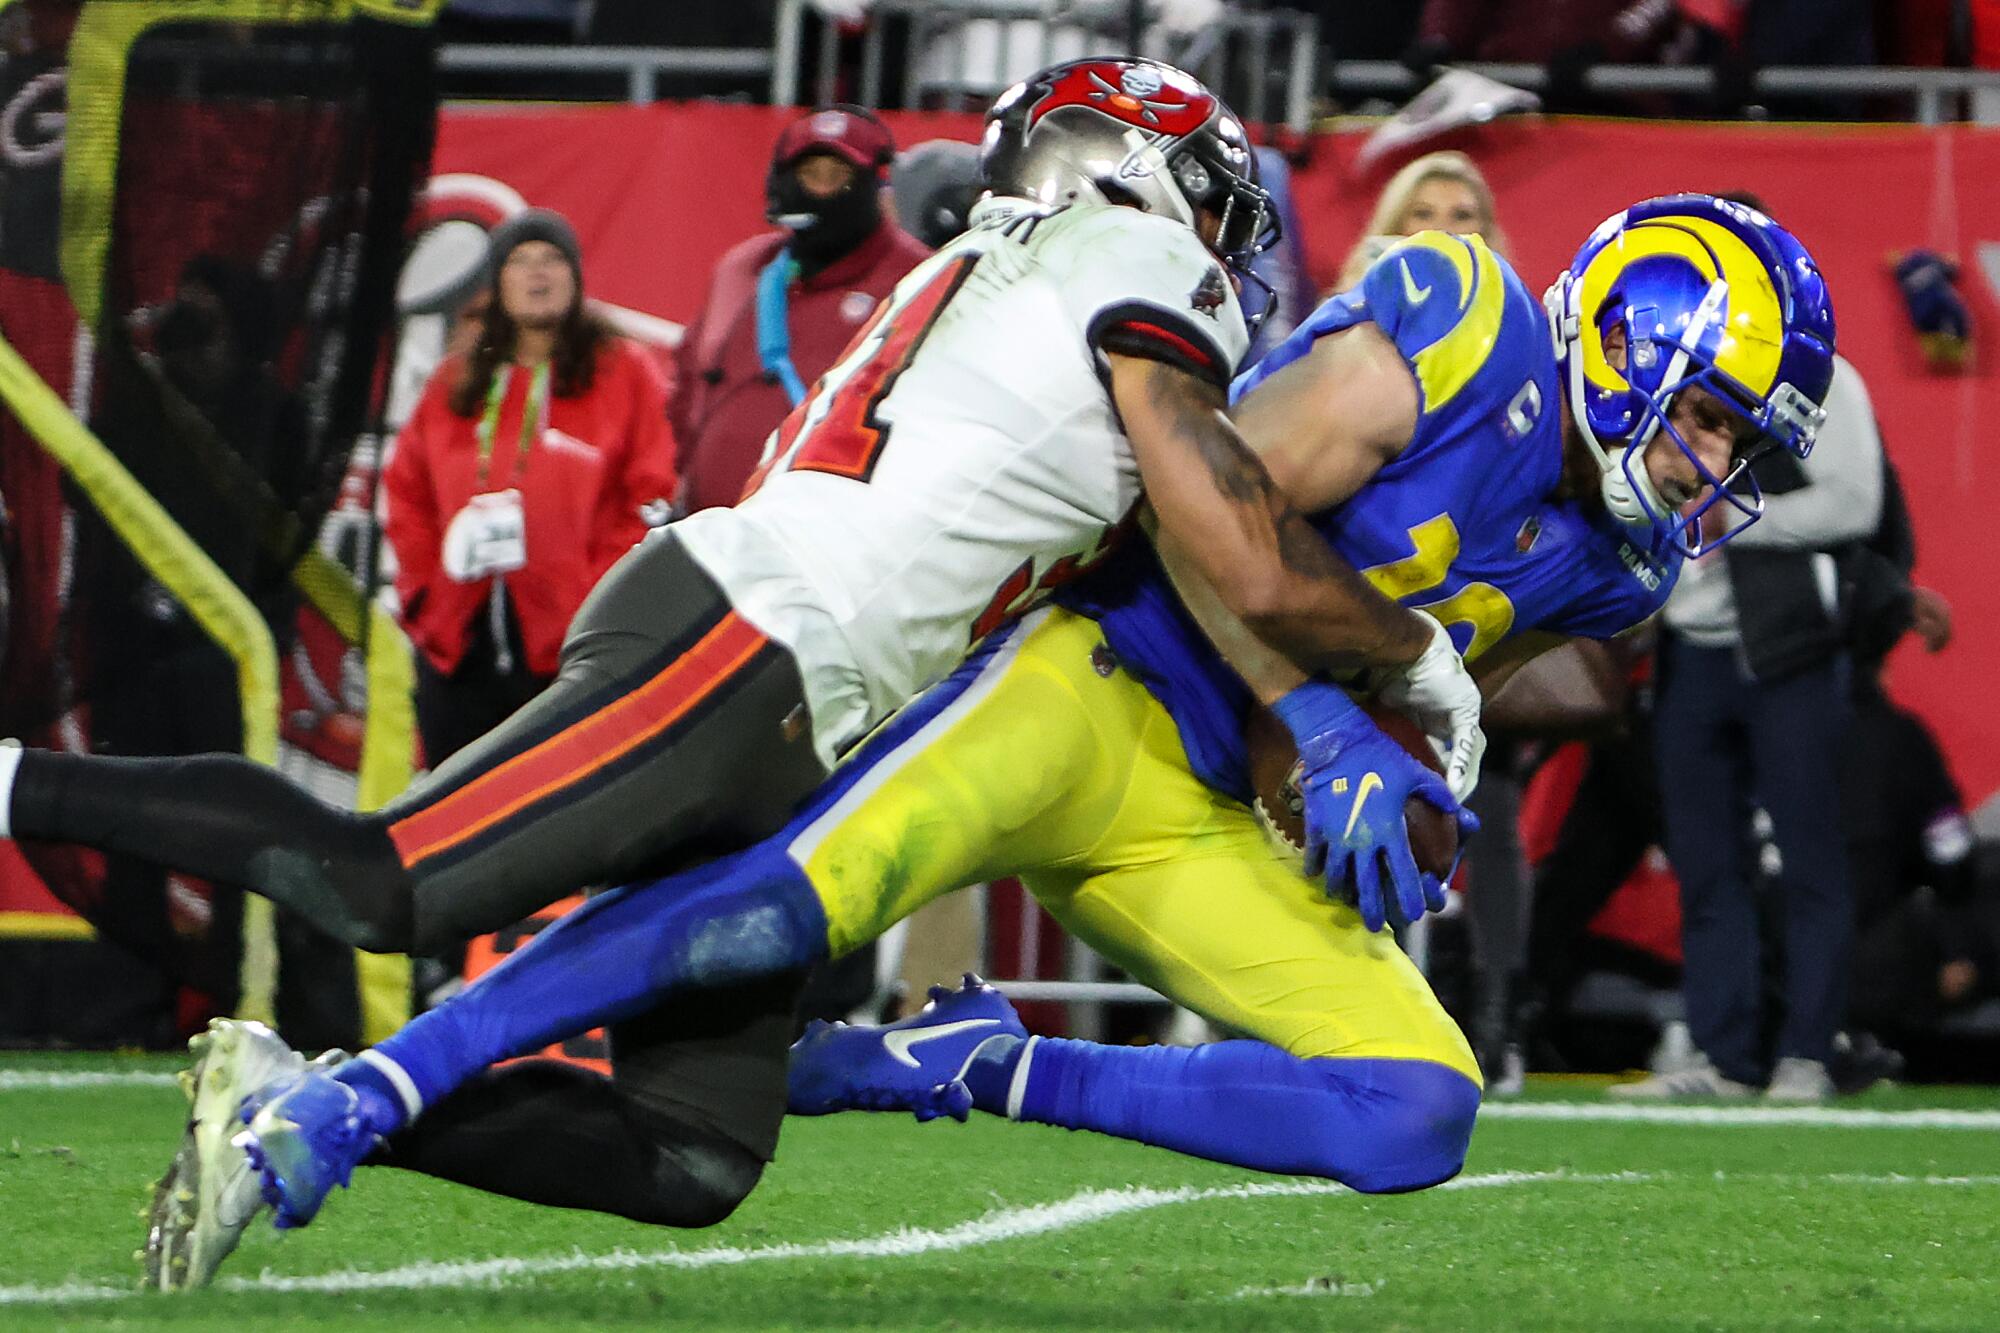 Rams wide receiver Cooper Kupp catches a pass against Buccaneers safety Antoine Winfield Jr.